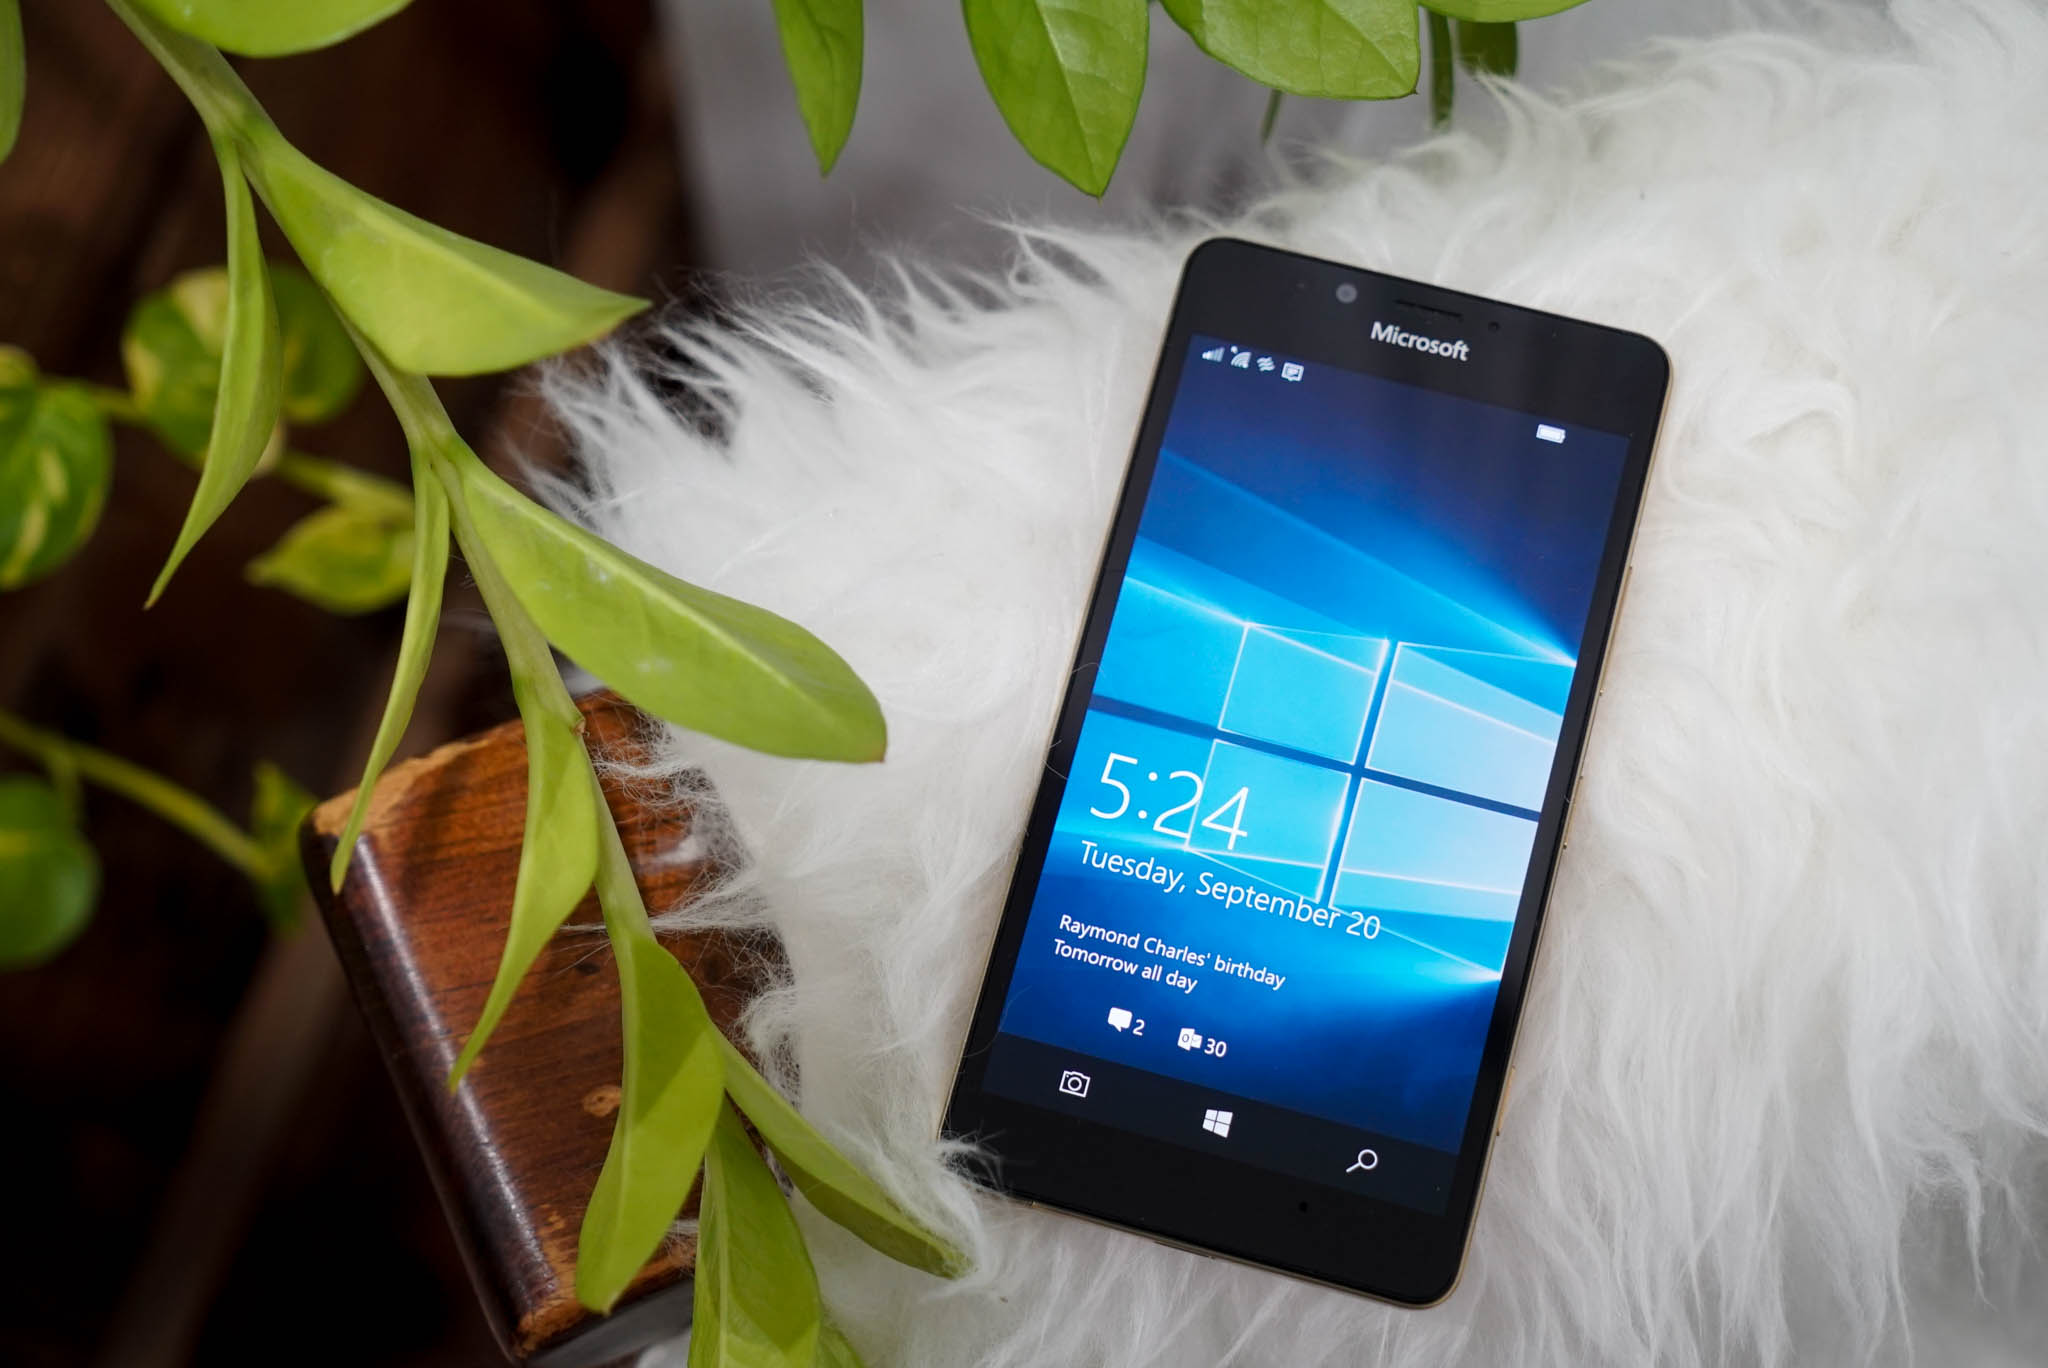 Windows 10 Mobile Creators Update to start rolling out April 25